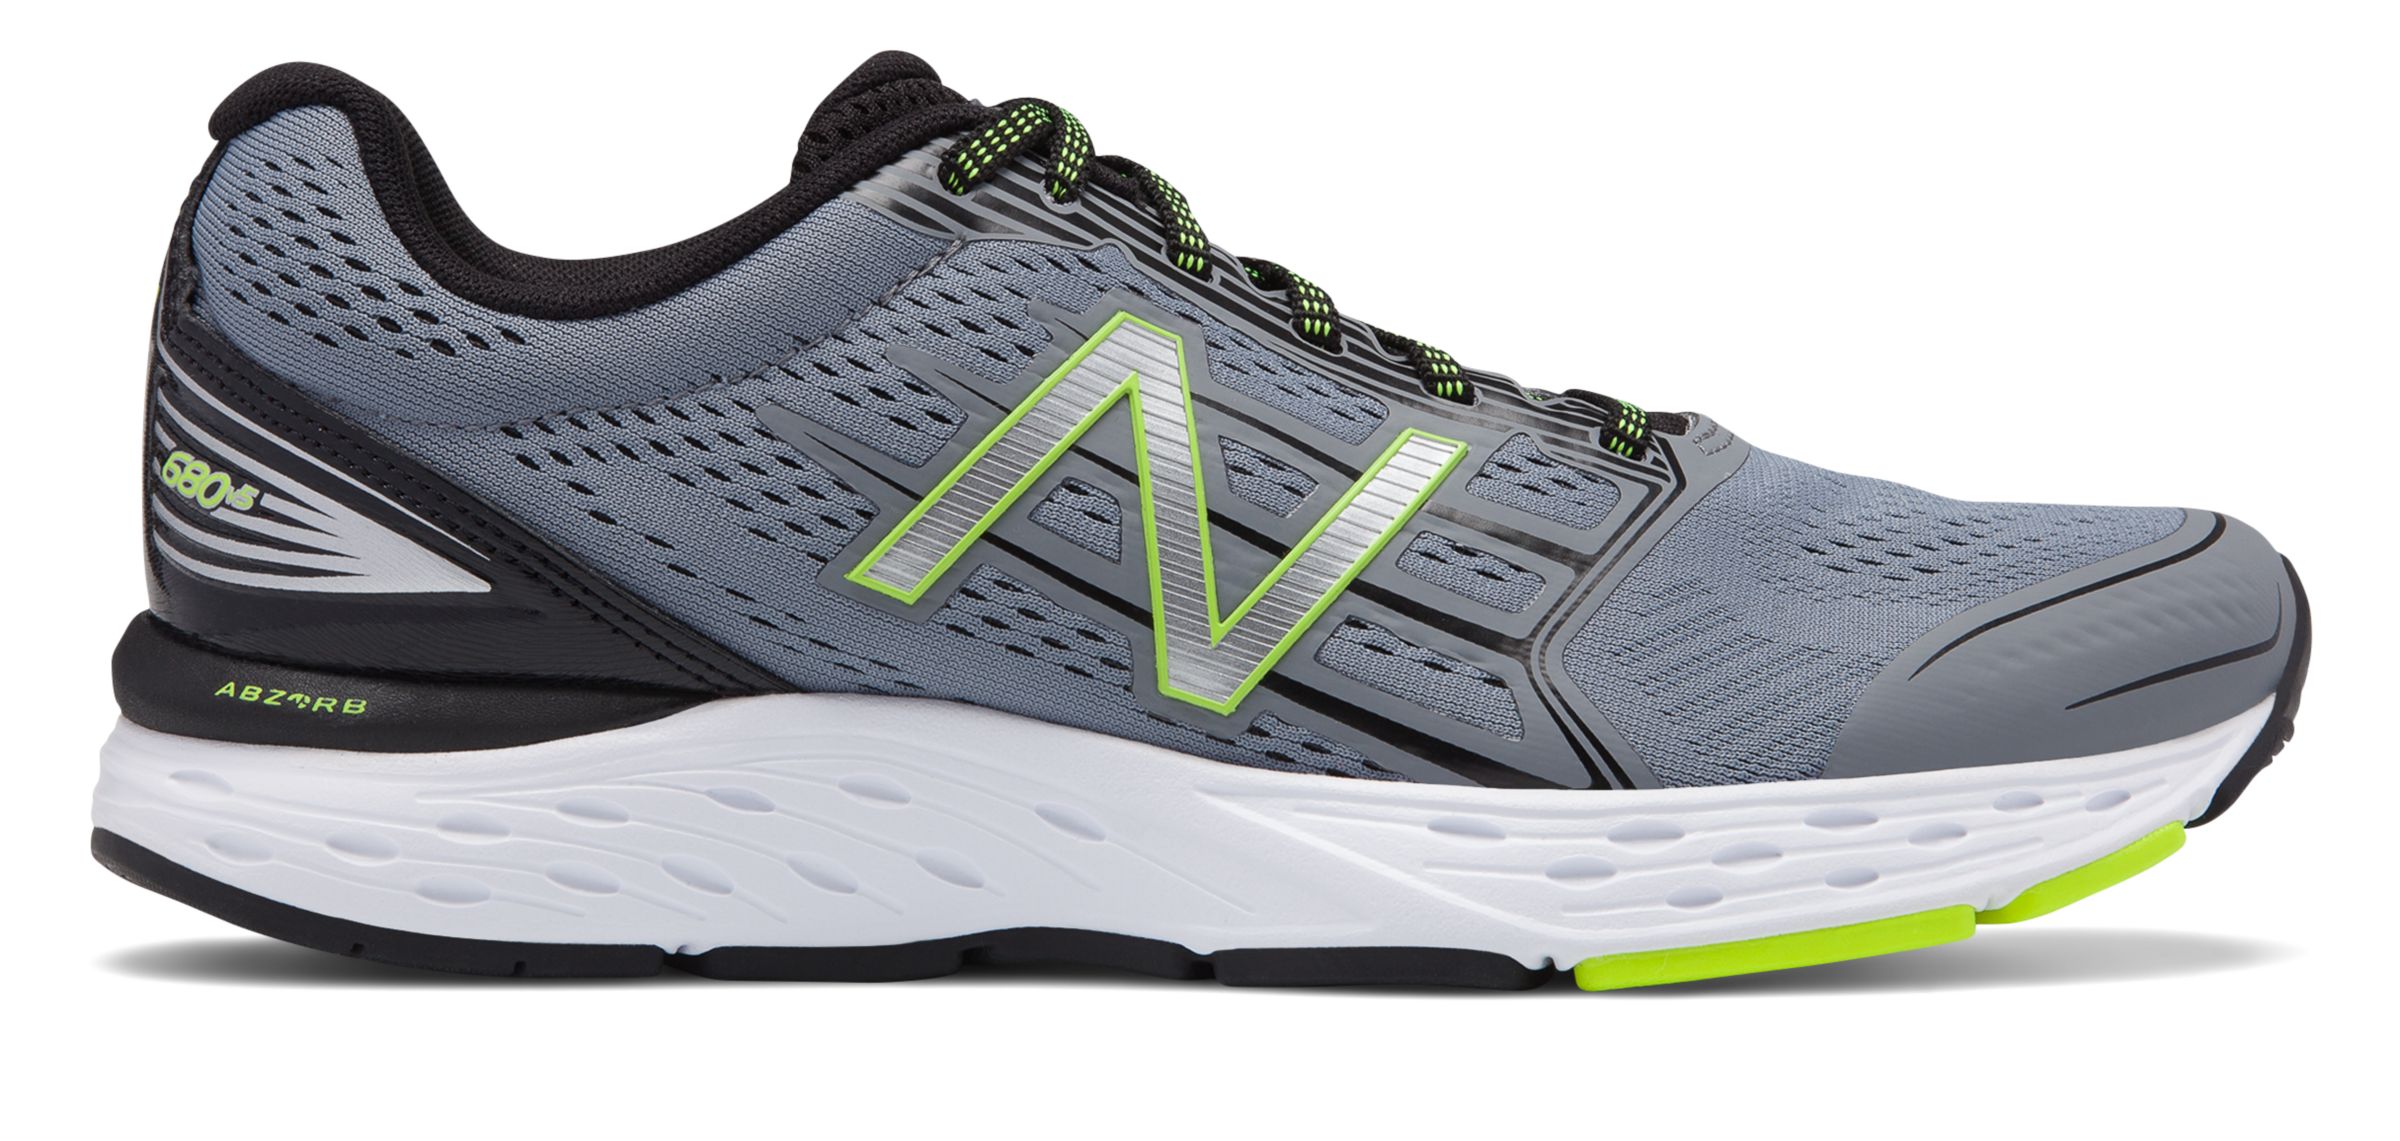 New Balance M680-V5 on Sale - Discounts Up to 57% Off on M680CG5 at Joe's New  Balance Outlet